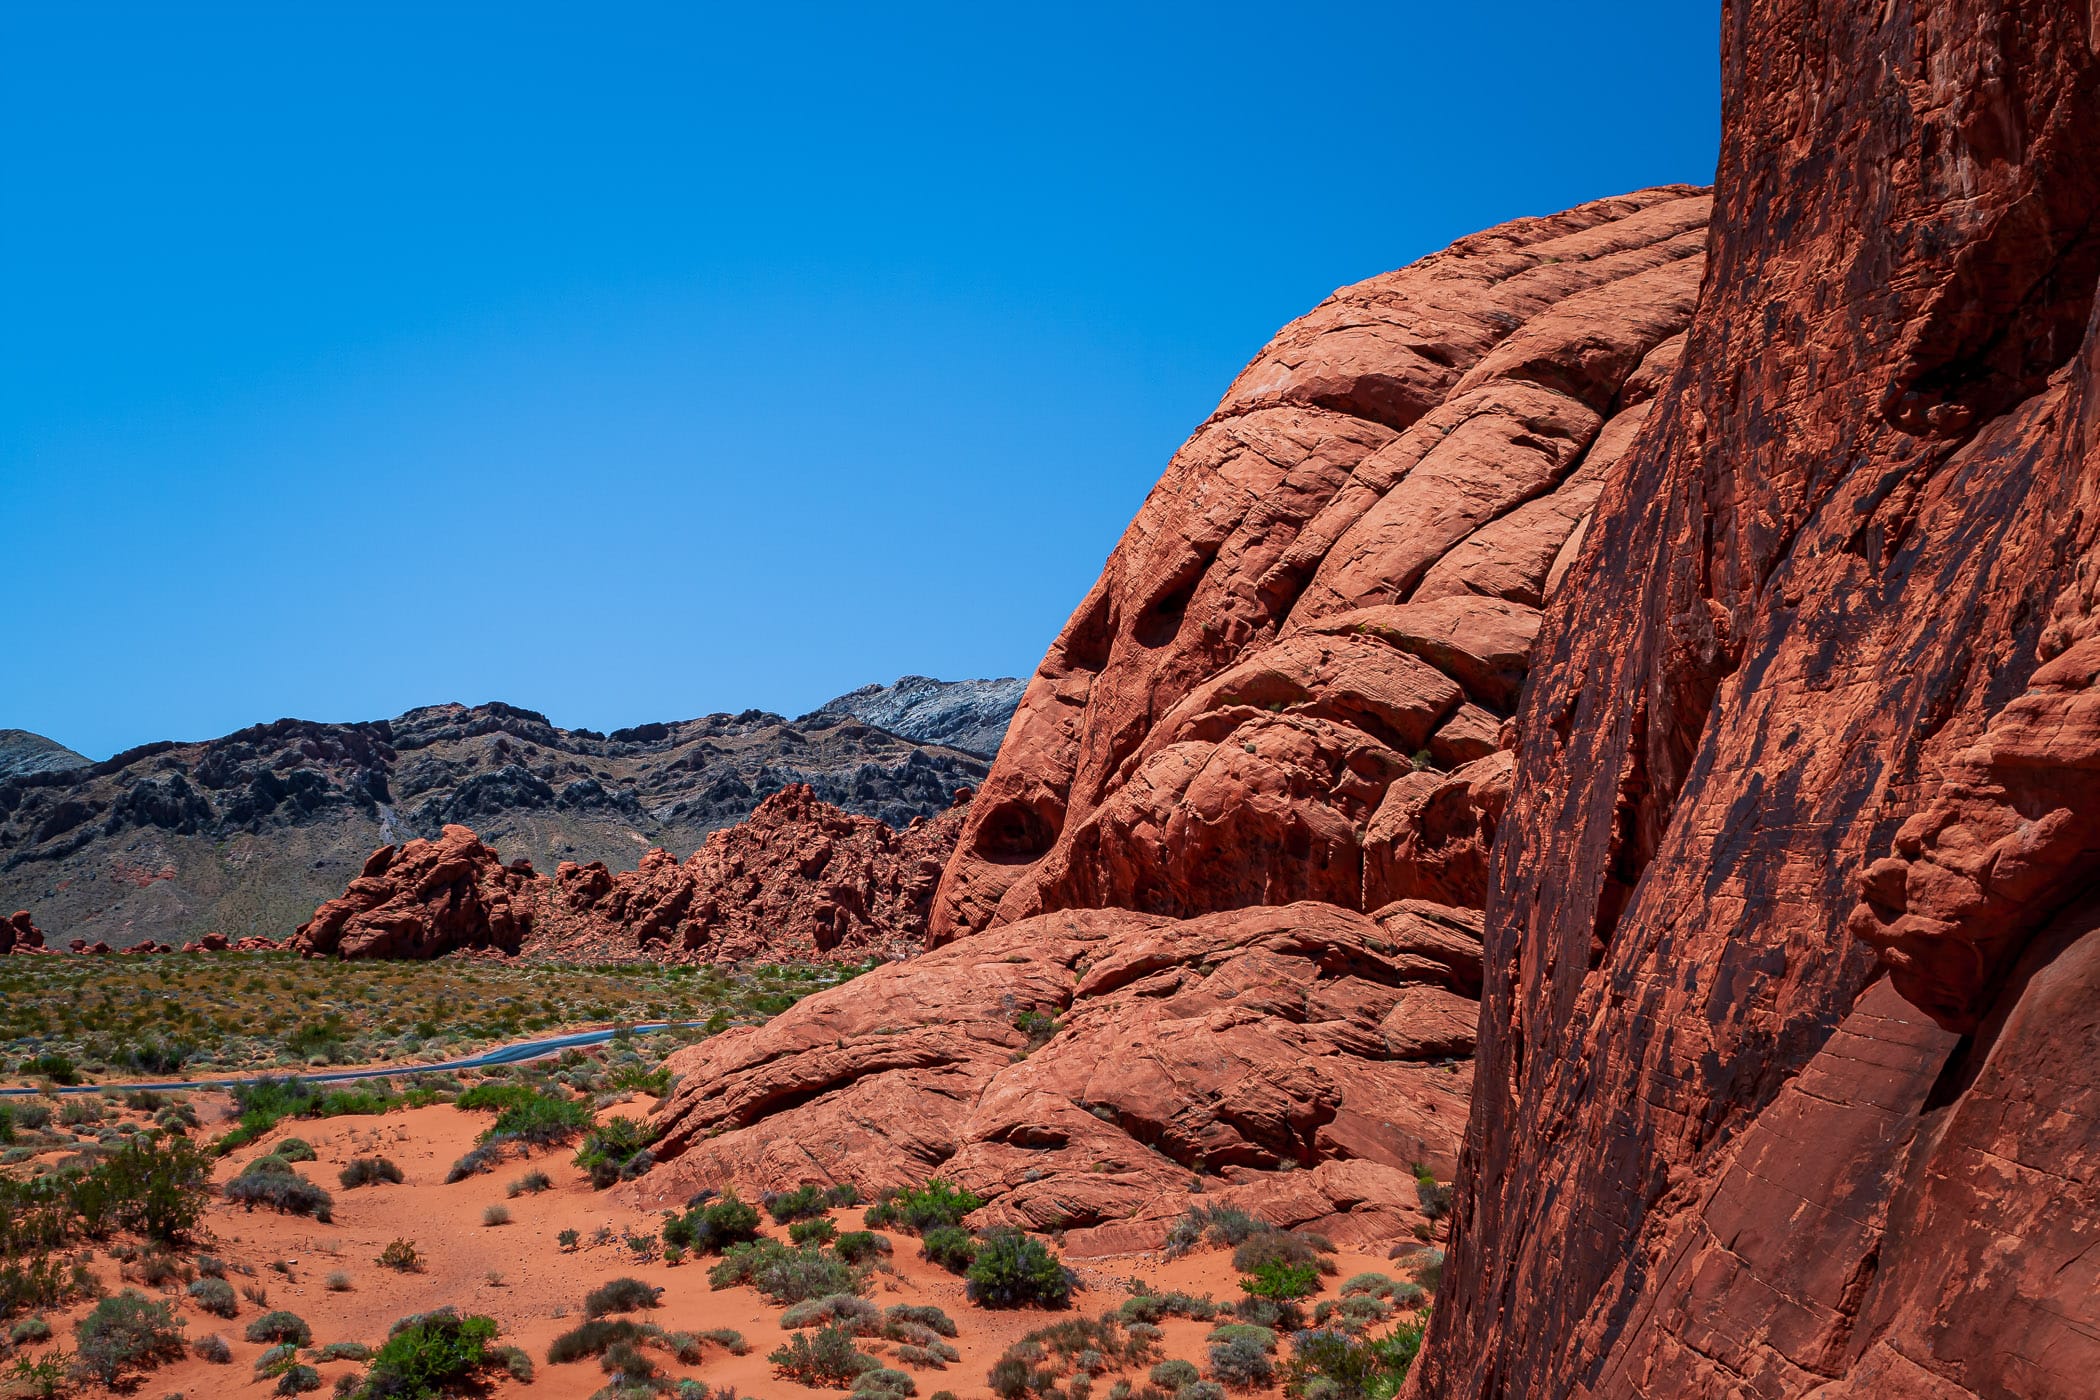 The parched landscape of Nevada's Valley of Fire State Park.